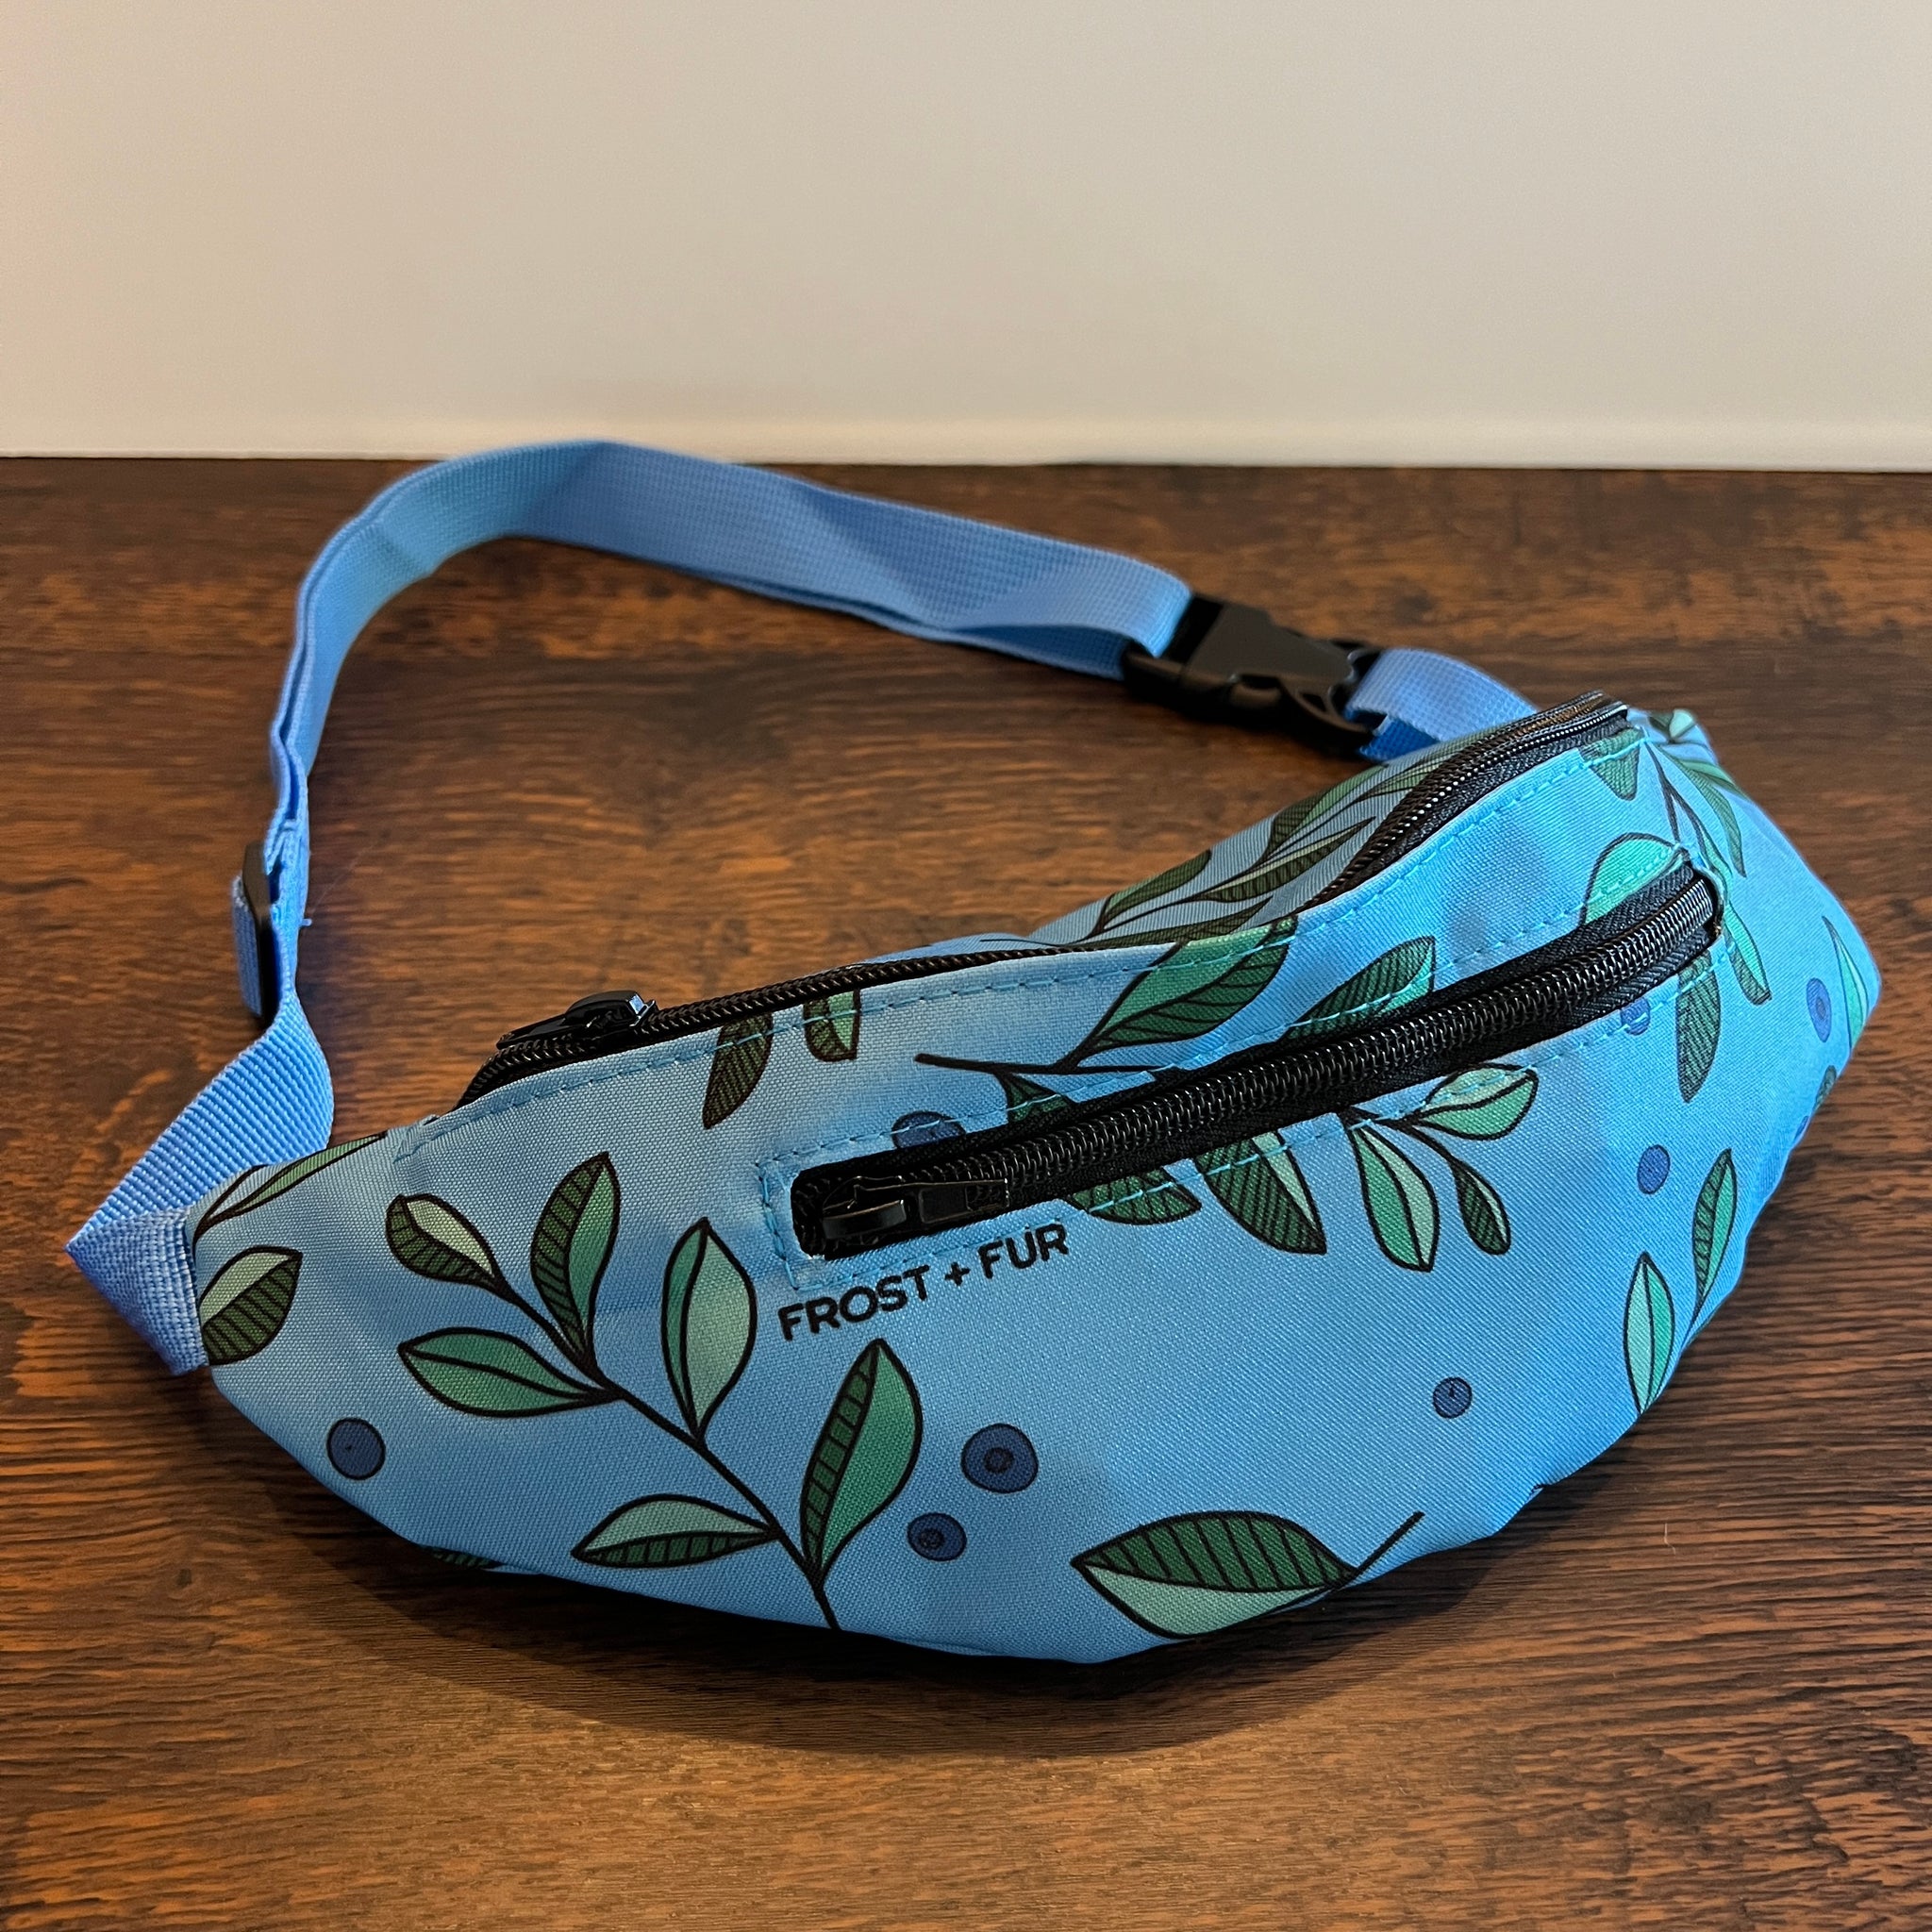 Blueberry Fanny Pack